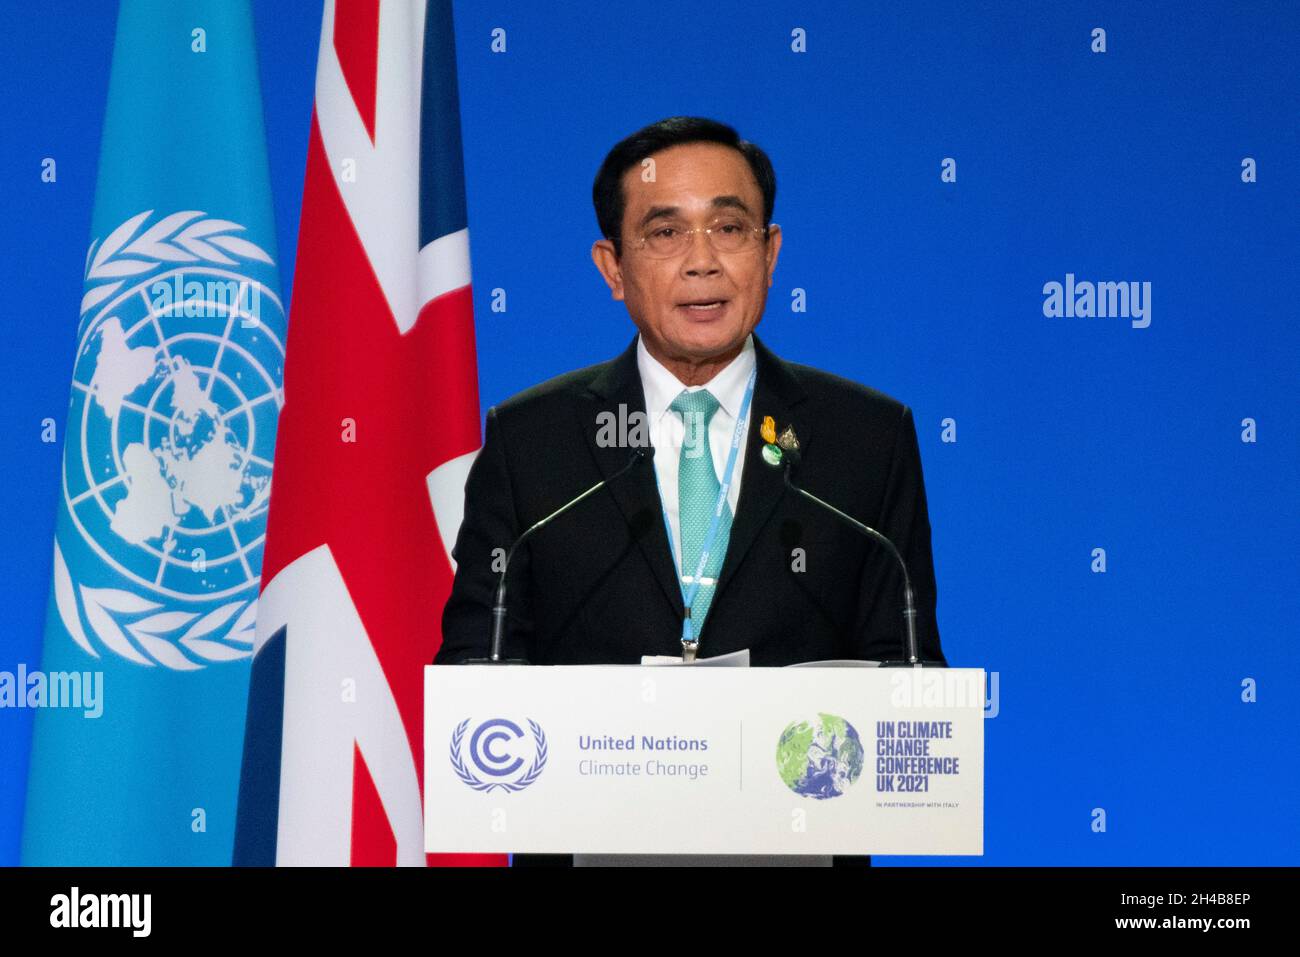 Glasgow, Scotland, UK. 1st November 2021.  Prayut Chan-o-cha the prime Minister of Thailand,  makes National Statement  to the COP26 UN climate change conference in Glasgow.  Iain Masterton/Alamy Live News. Stock Photo